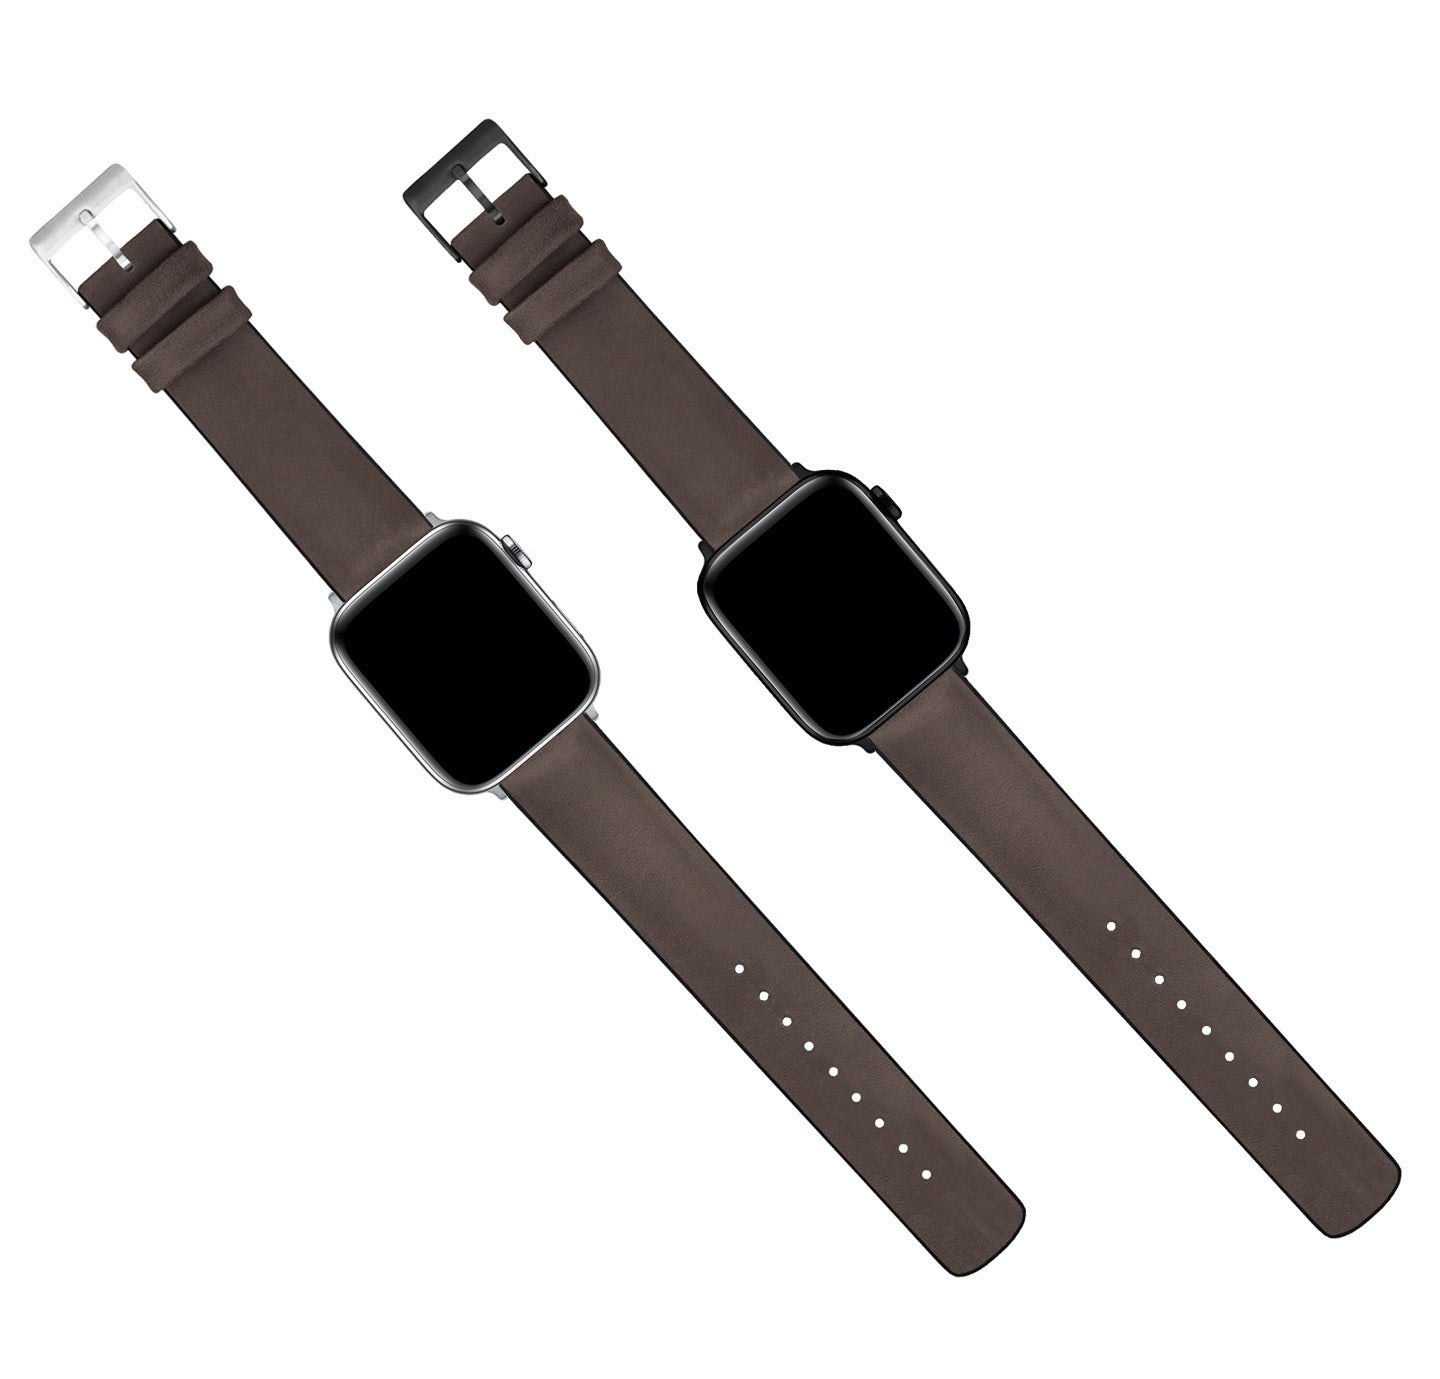 Apple Watch | Smoke Leather and Rubber Hybrid - Barton Watch Bands